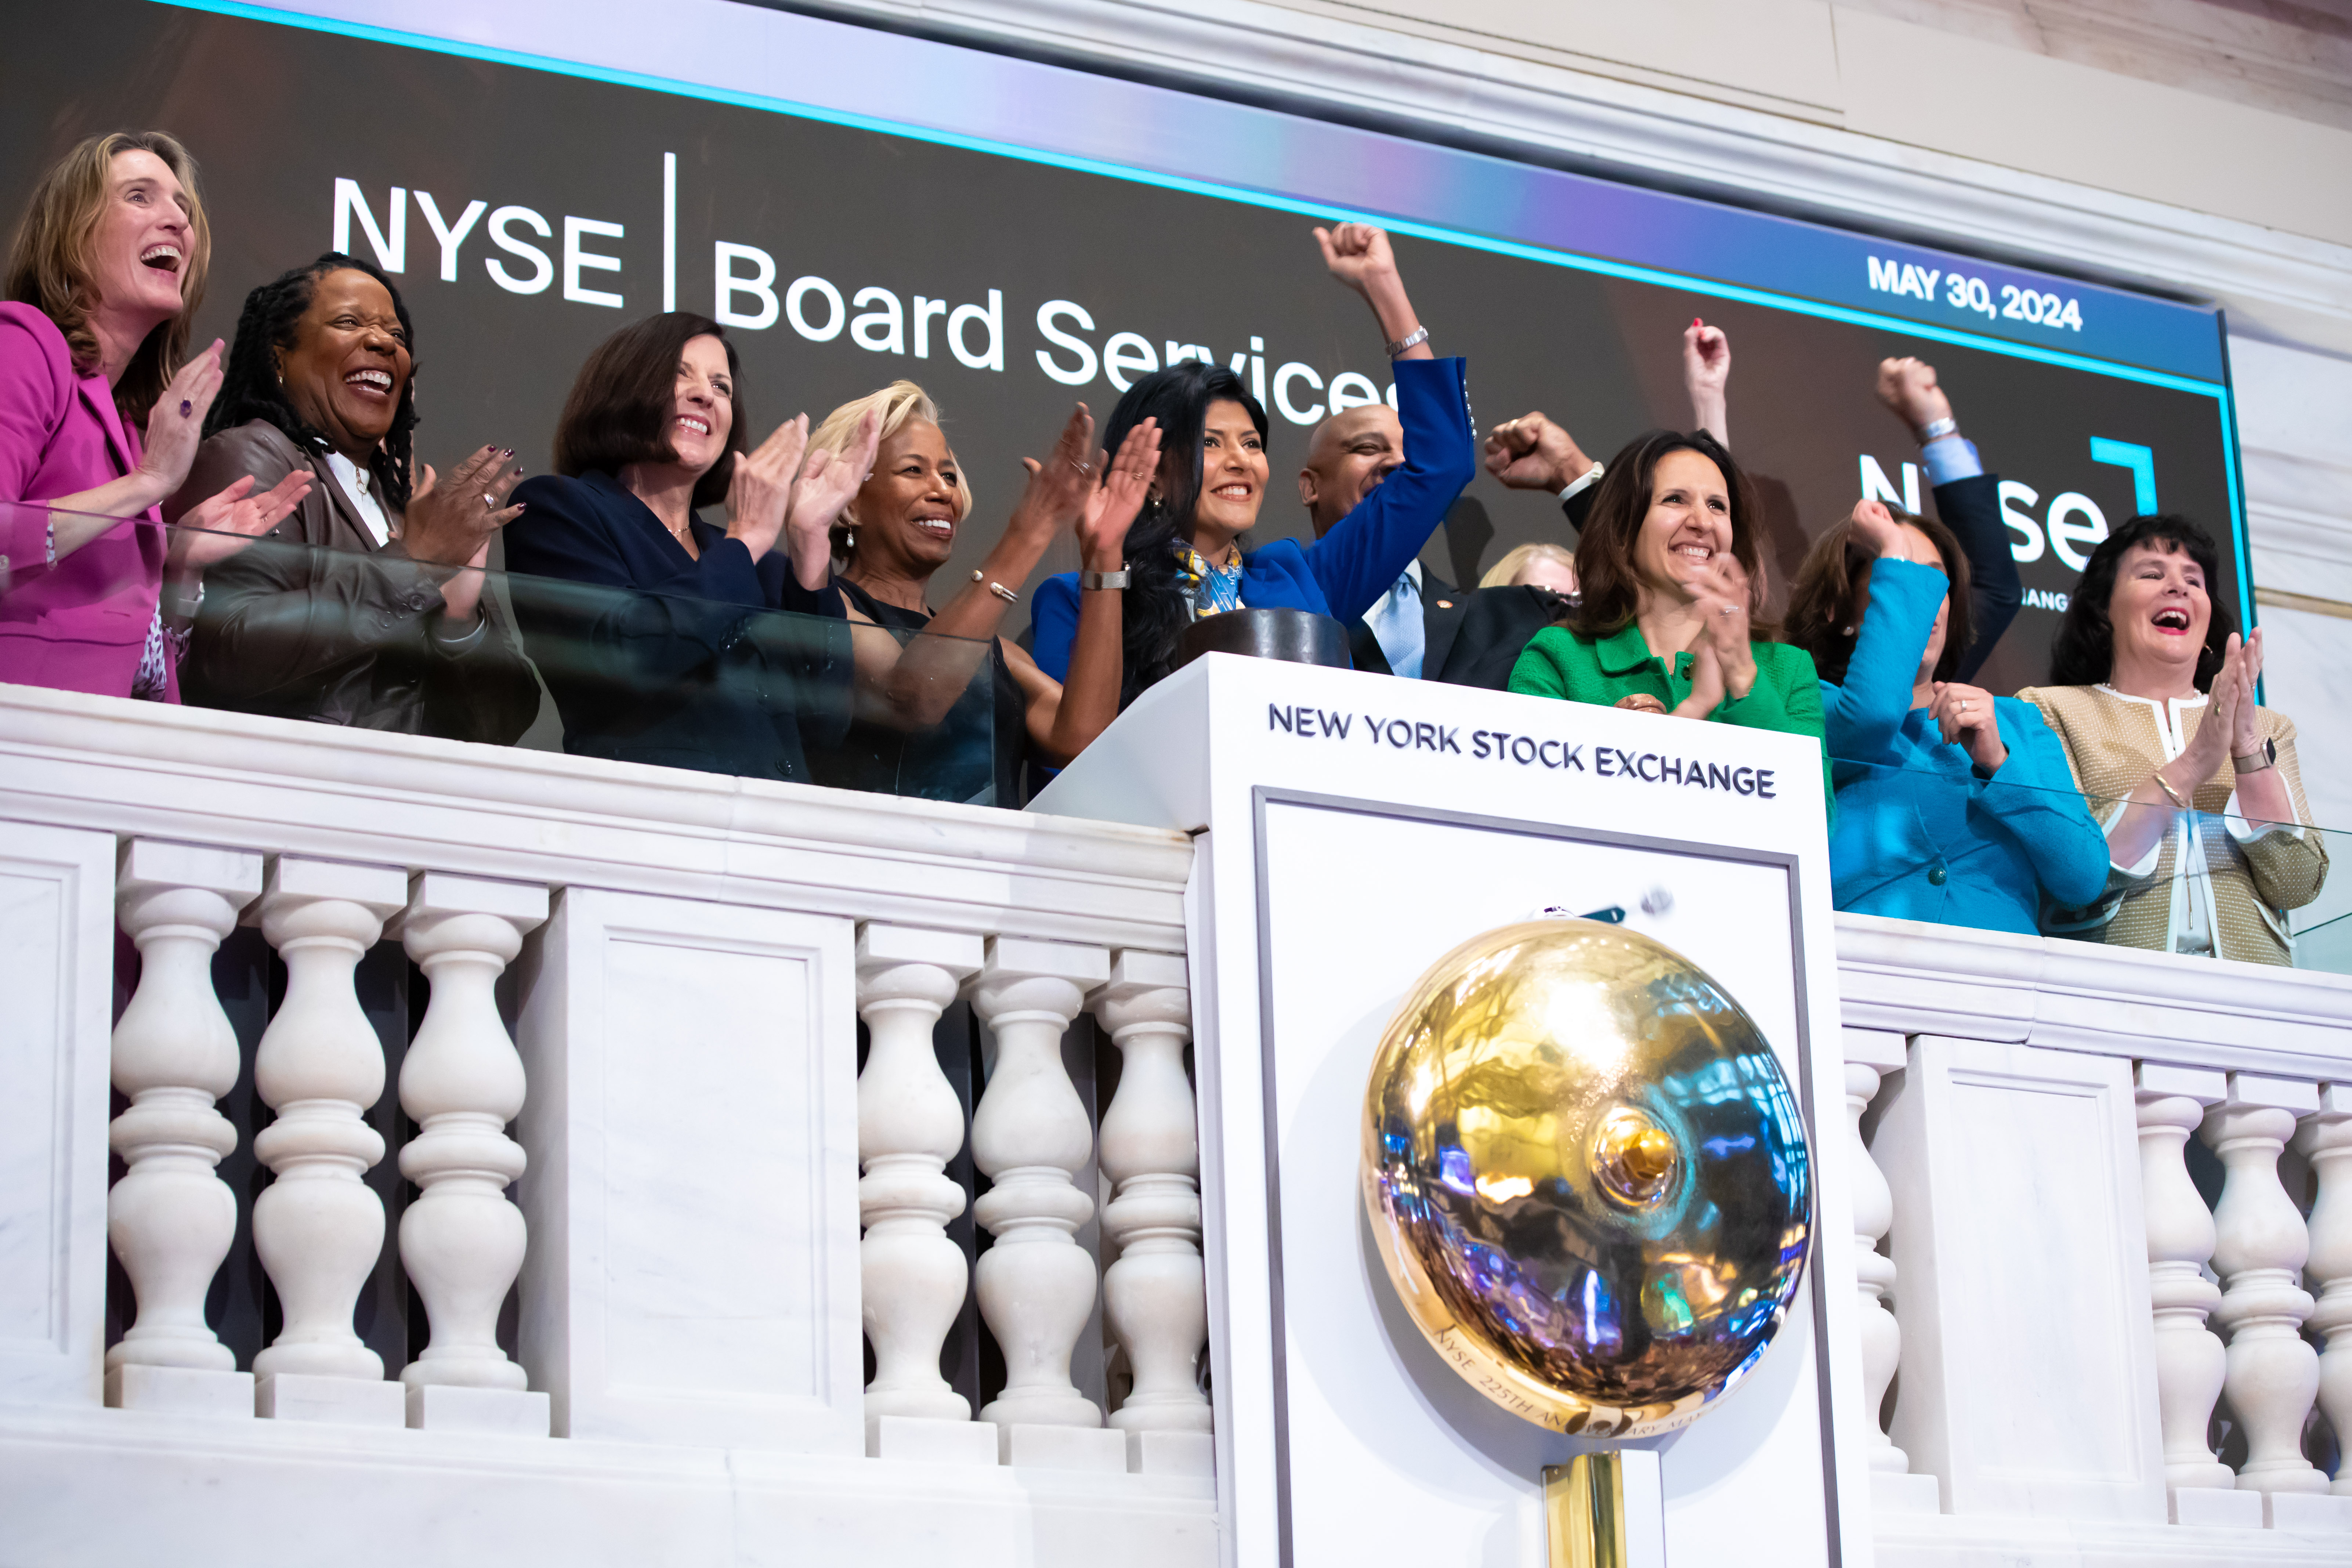 NYSE Board Services rings NYSE Opening Bell